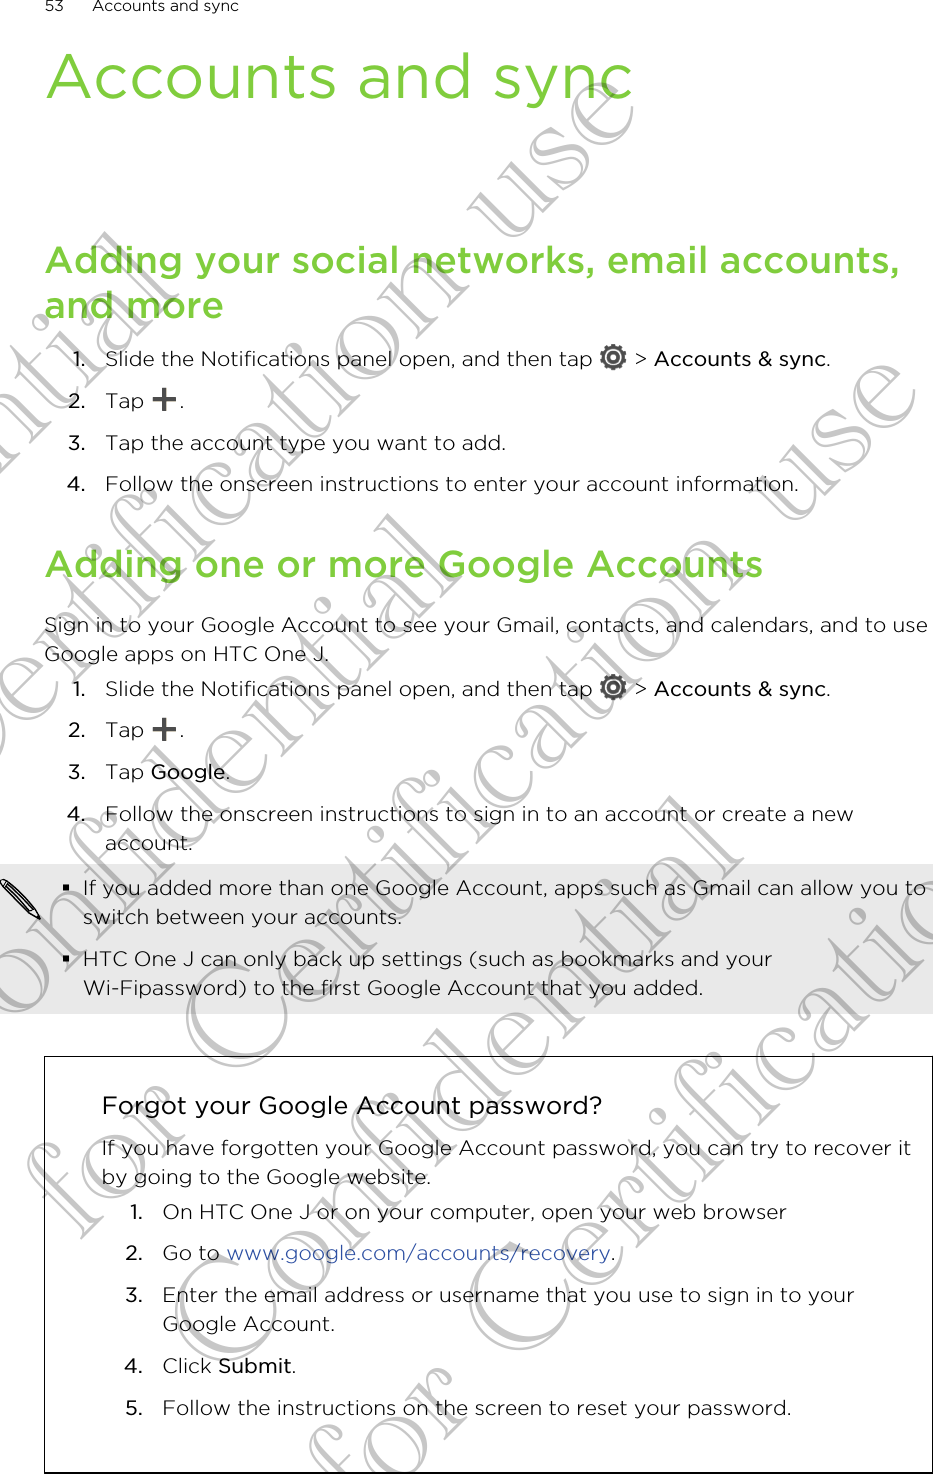 Accounts and syncAdding your social networks, email accounts,and more1. Slide the Notifications panel open, and then tap   &gt; Accounts &amp; sync.2. Tap  .3. Tap the account type you want to add.4. Follow the onscreen instructions to enter your account information.Adding one or more Google AccountsSign in to your Google Account to see your Gmail, contacts, and calendars, and to useGoogle apps on HTC One J.1. Slide the Notifications panel open, and then tap   &gt; Accounts &amp; sync.2. Tap  .3. Tap Google.4. Follow the onscreen instructions to sign in to an account or create a newaccount.§If you added more than one Google Account, apps such as Gmail can allow you toswitch between your accounts.§HTC One J can only back up settings (such as bookmarks and yourWi-Fipassword) to the first Google Account that you added.Forgot your Google Account password?If you have forgotten your Google Account password, you can try to recover itby going to the Google website.1. On HTC One J or on your computer, open your web browser2. Go to www.google.com/accounts/recovery.3. Enter the email address or username that you use to sign in to yourGoogle Account.4. Click Submit.5. Follow the instructions on the screen to reset your password.53 Accounts and syncConfidential for Certification use Confidential for Certification use Confidential for Certification use 